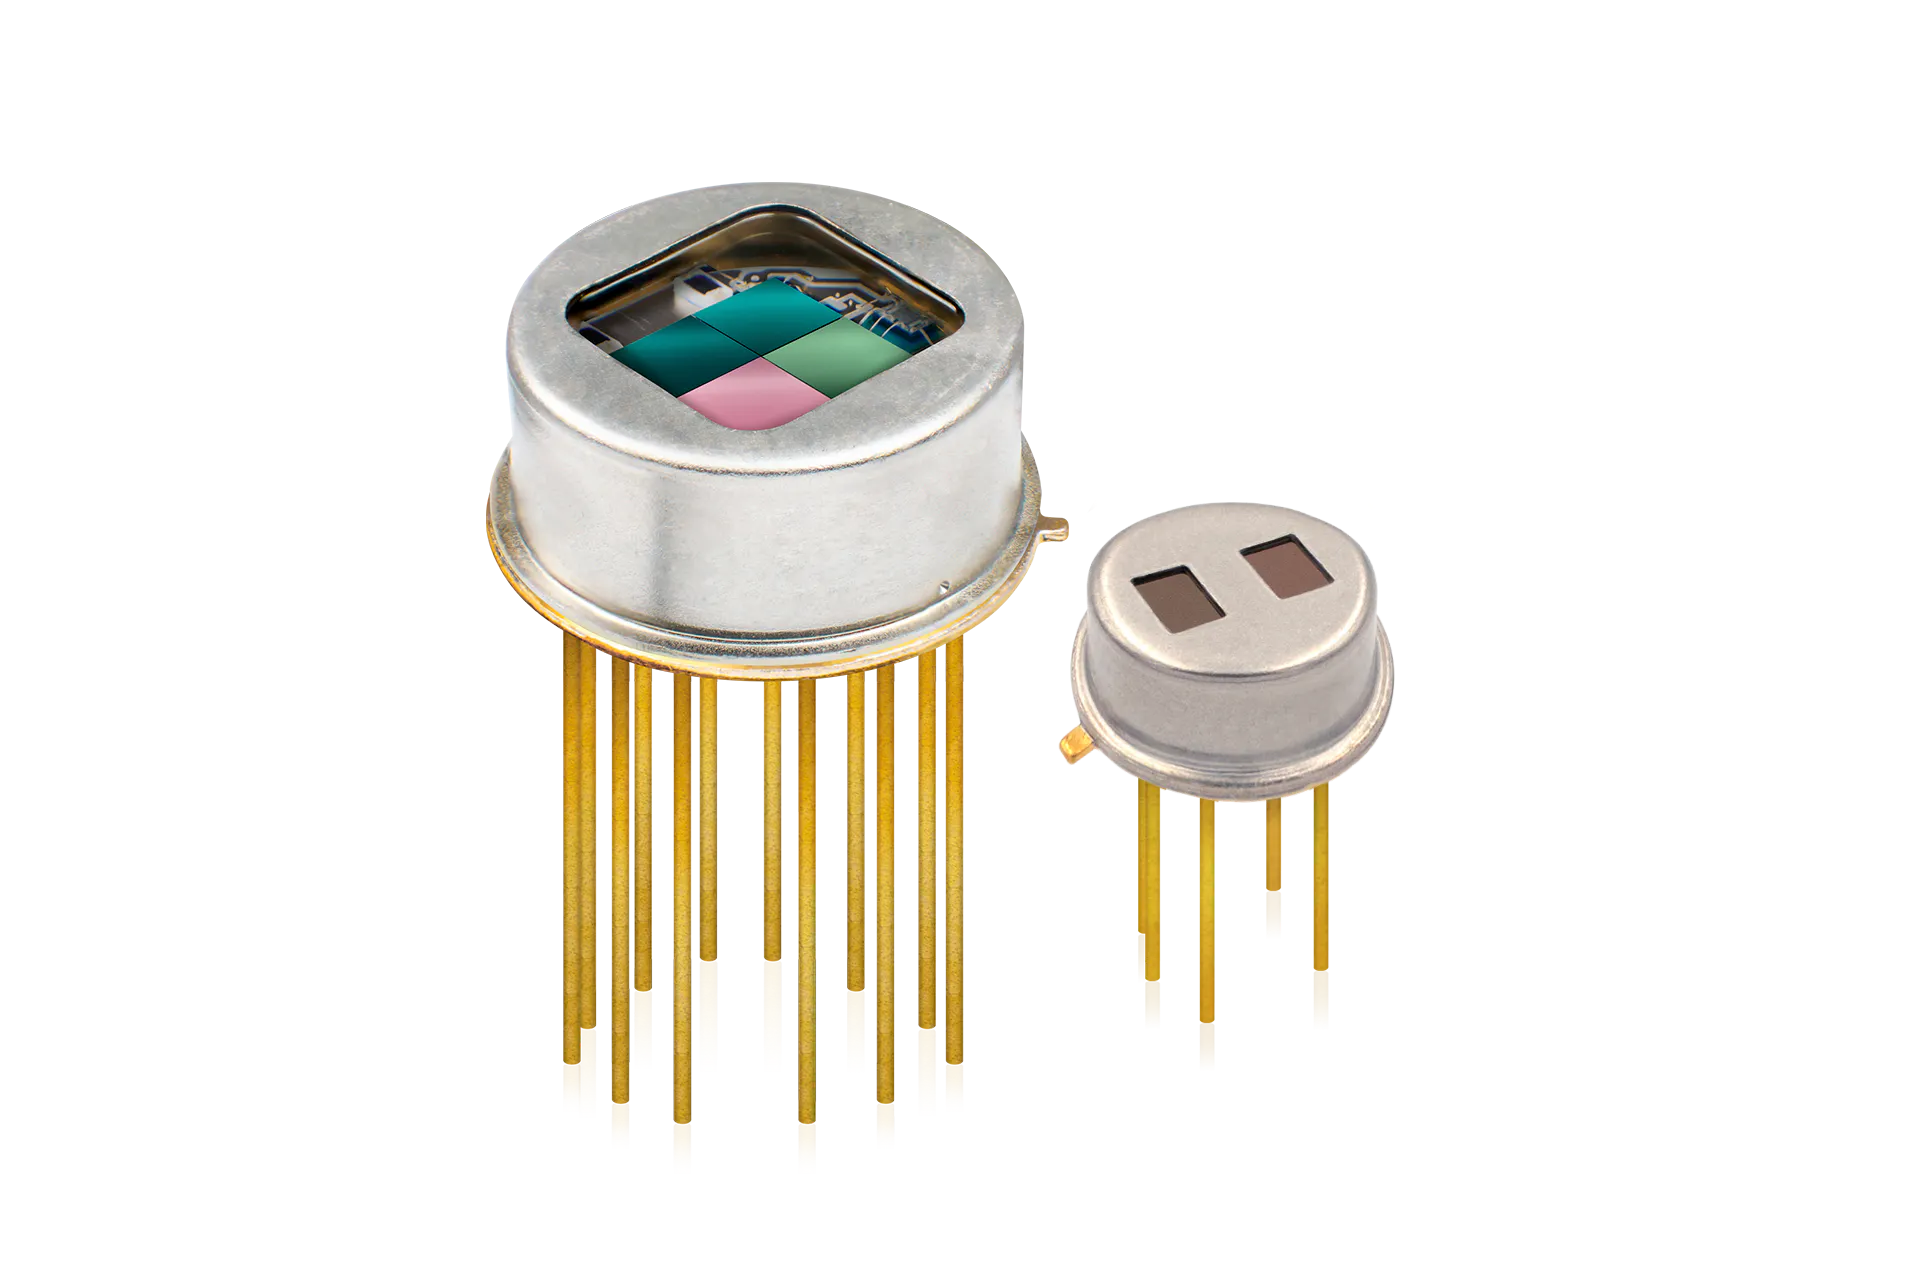 Pyroelectric detectors and infrared filters by InfraTec